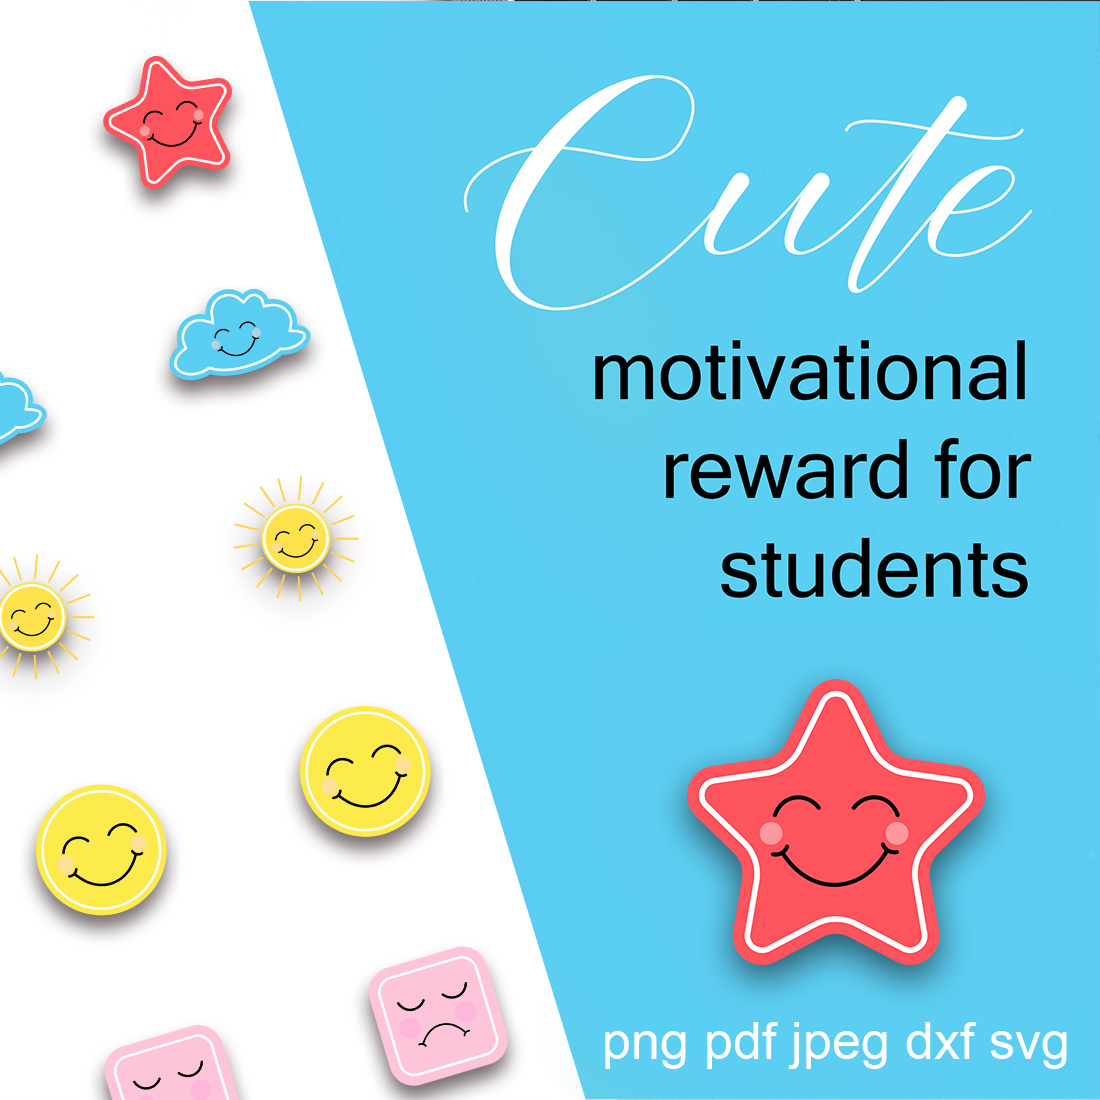 Reward Your Students with These Fun Stickers cover image.